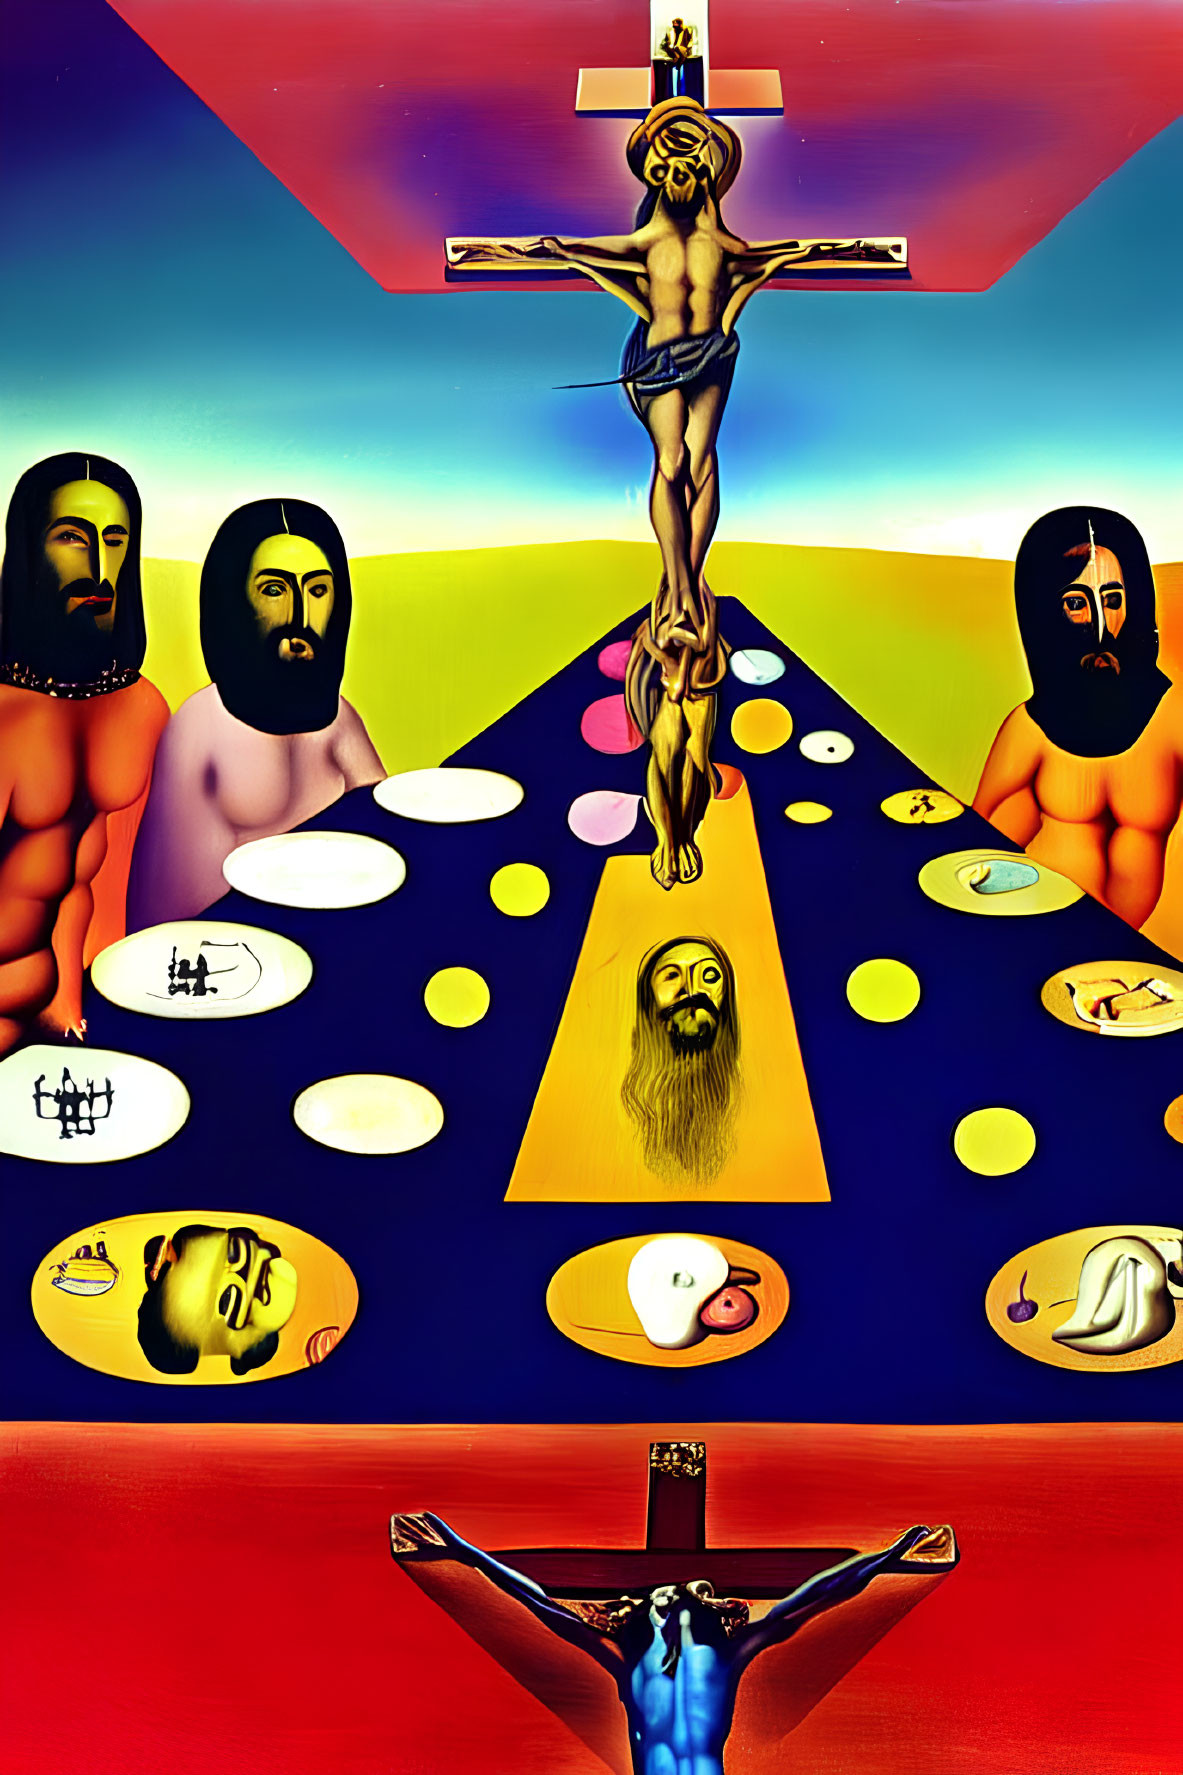 Surreal Crucifixion Scene with Stylized Figures and Symbolic Items